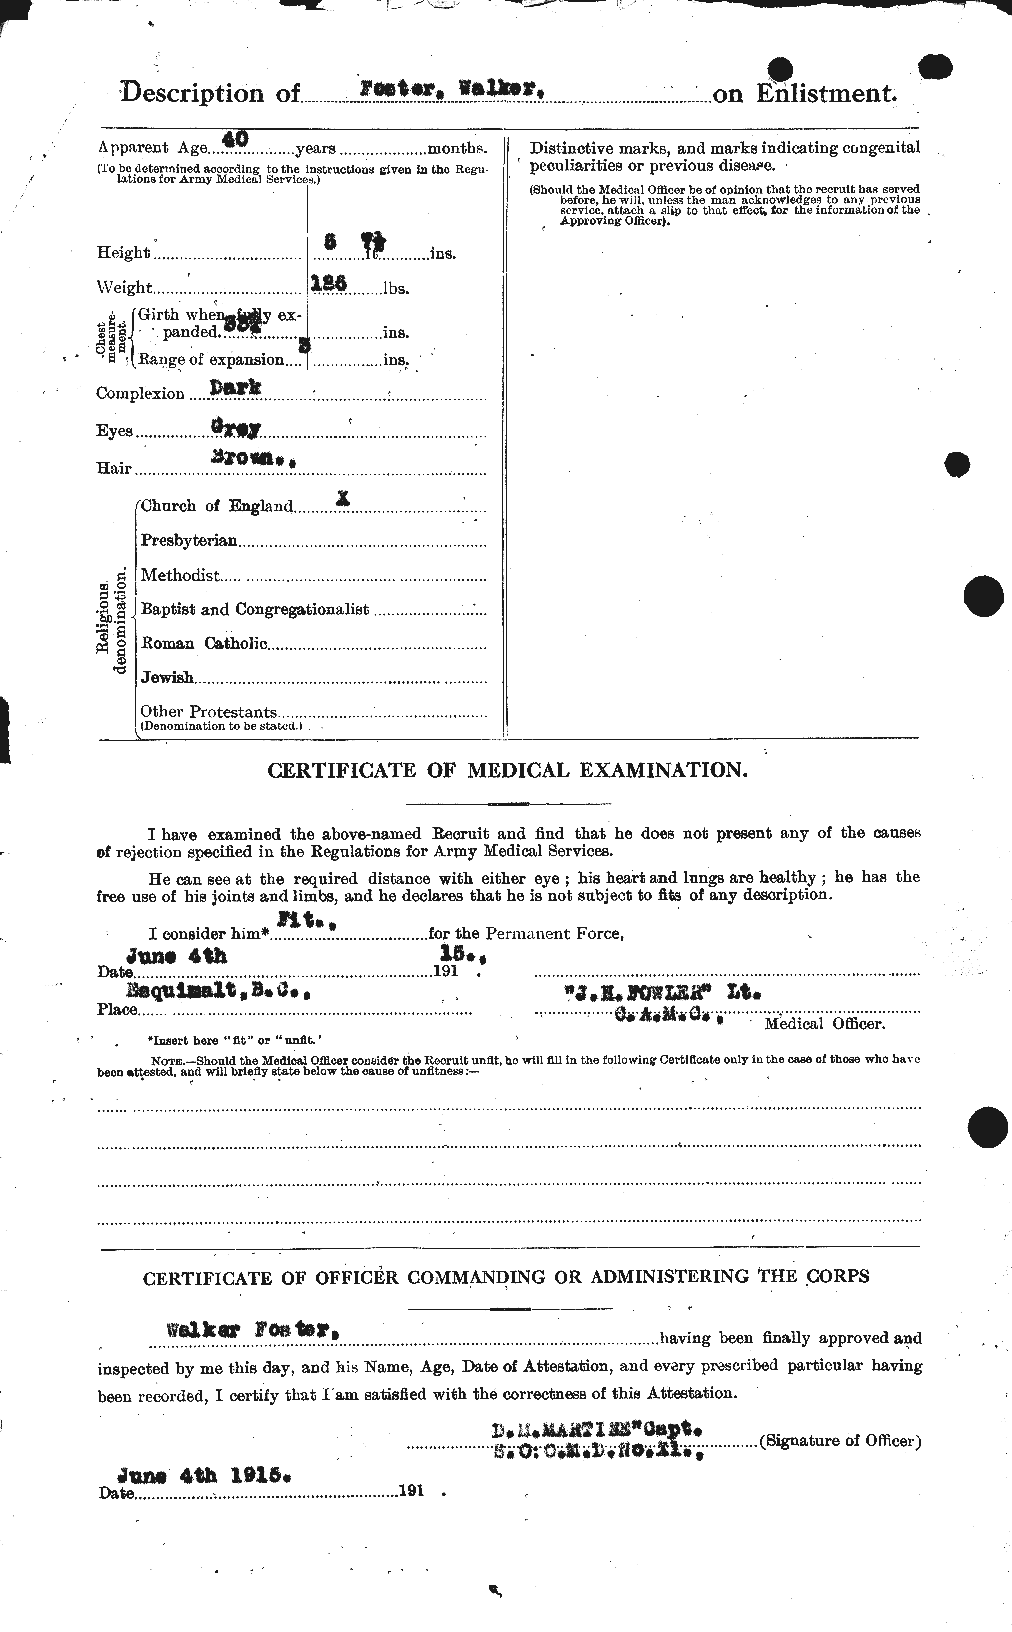 Personnel Records of the First World War - CEF 335250b